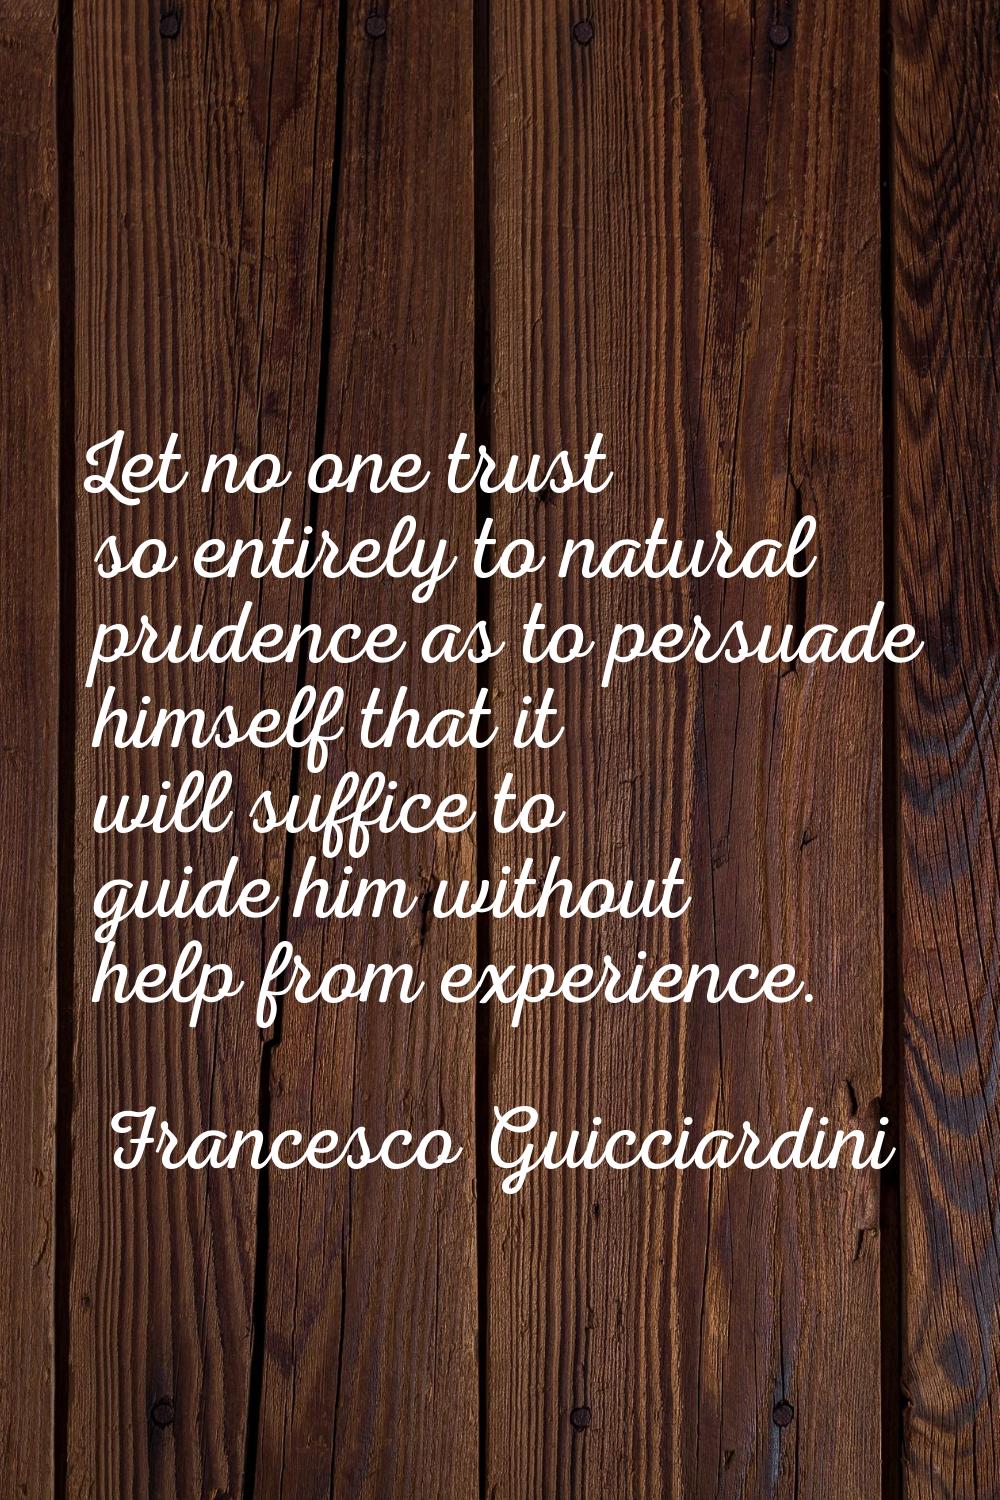 Let no one trust so entirely to natural prudence as to persuade himself that it will suffice to gui